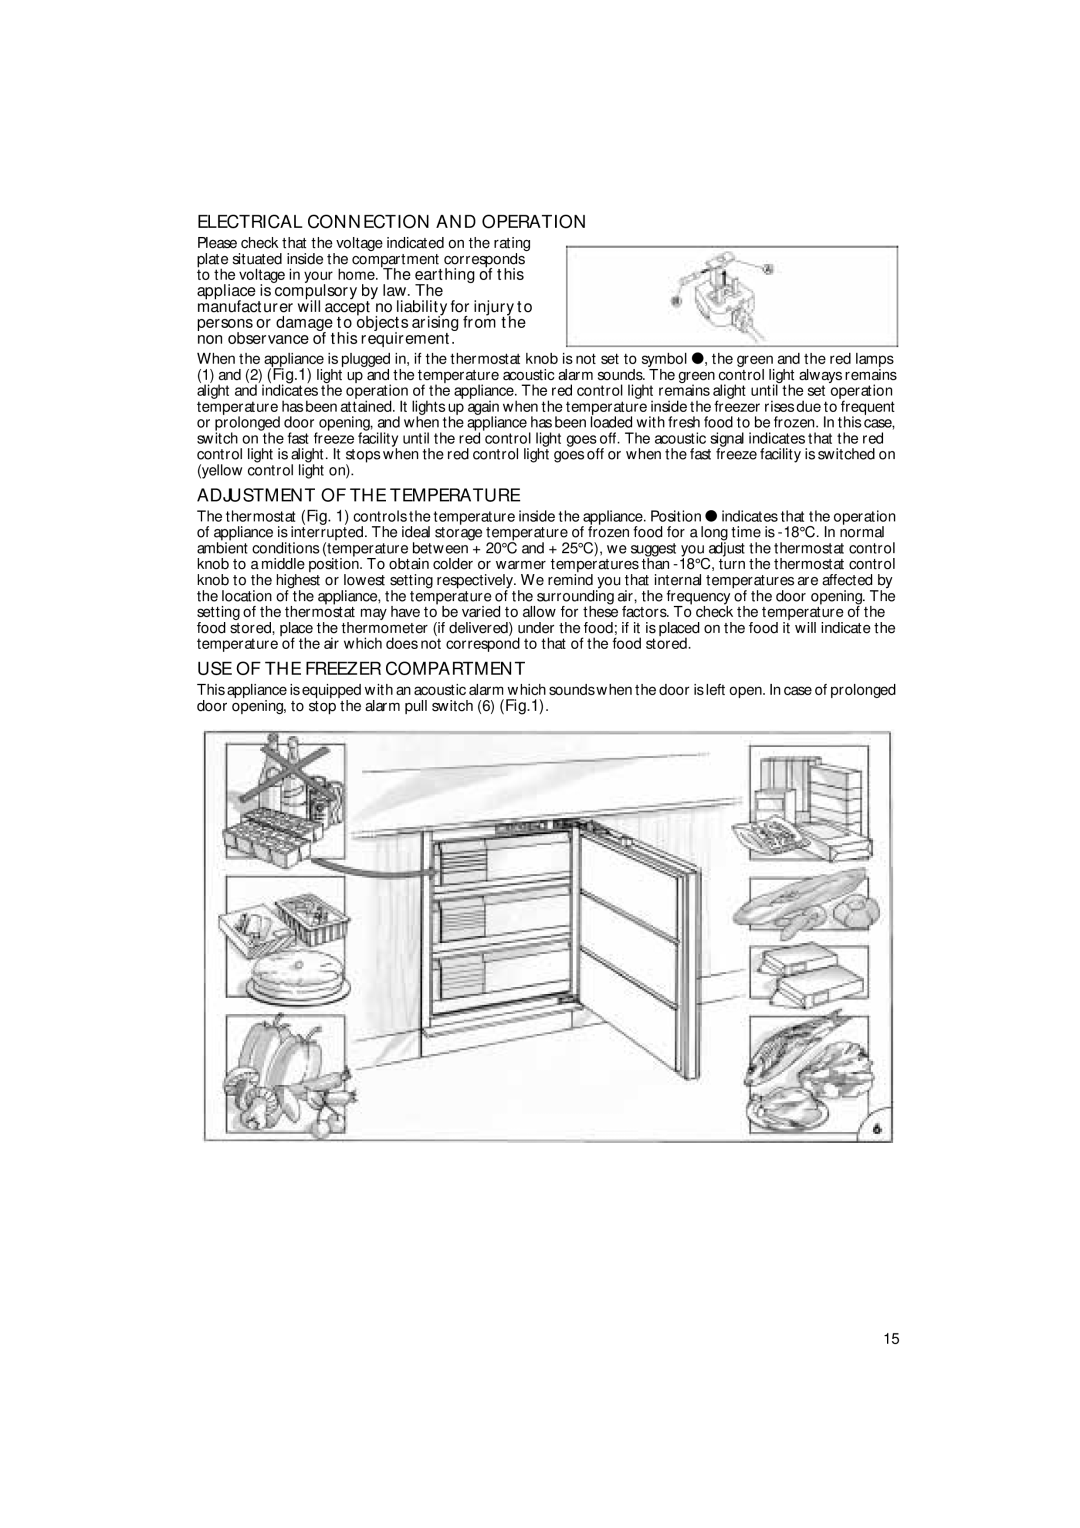 Smeg VR115A manual Electrical Connection And Operation, Adjustment Of The Temperature, Use Of The Freezer Compartment 